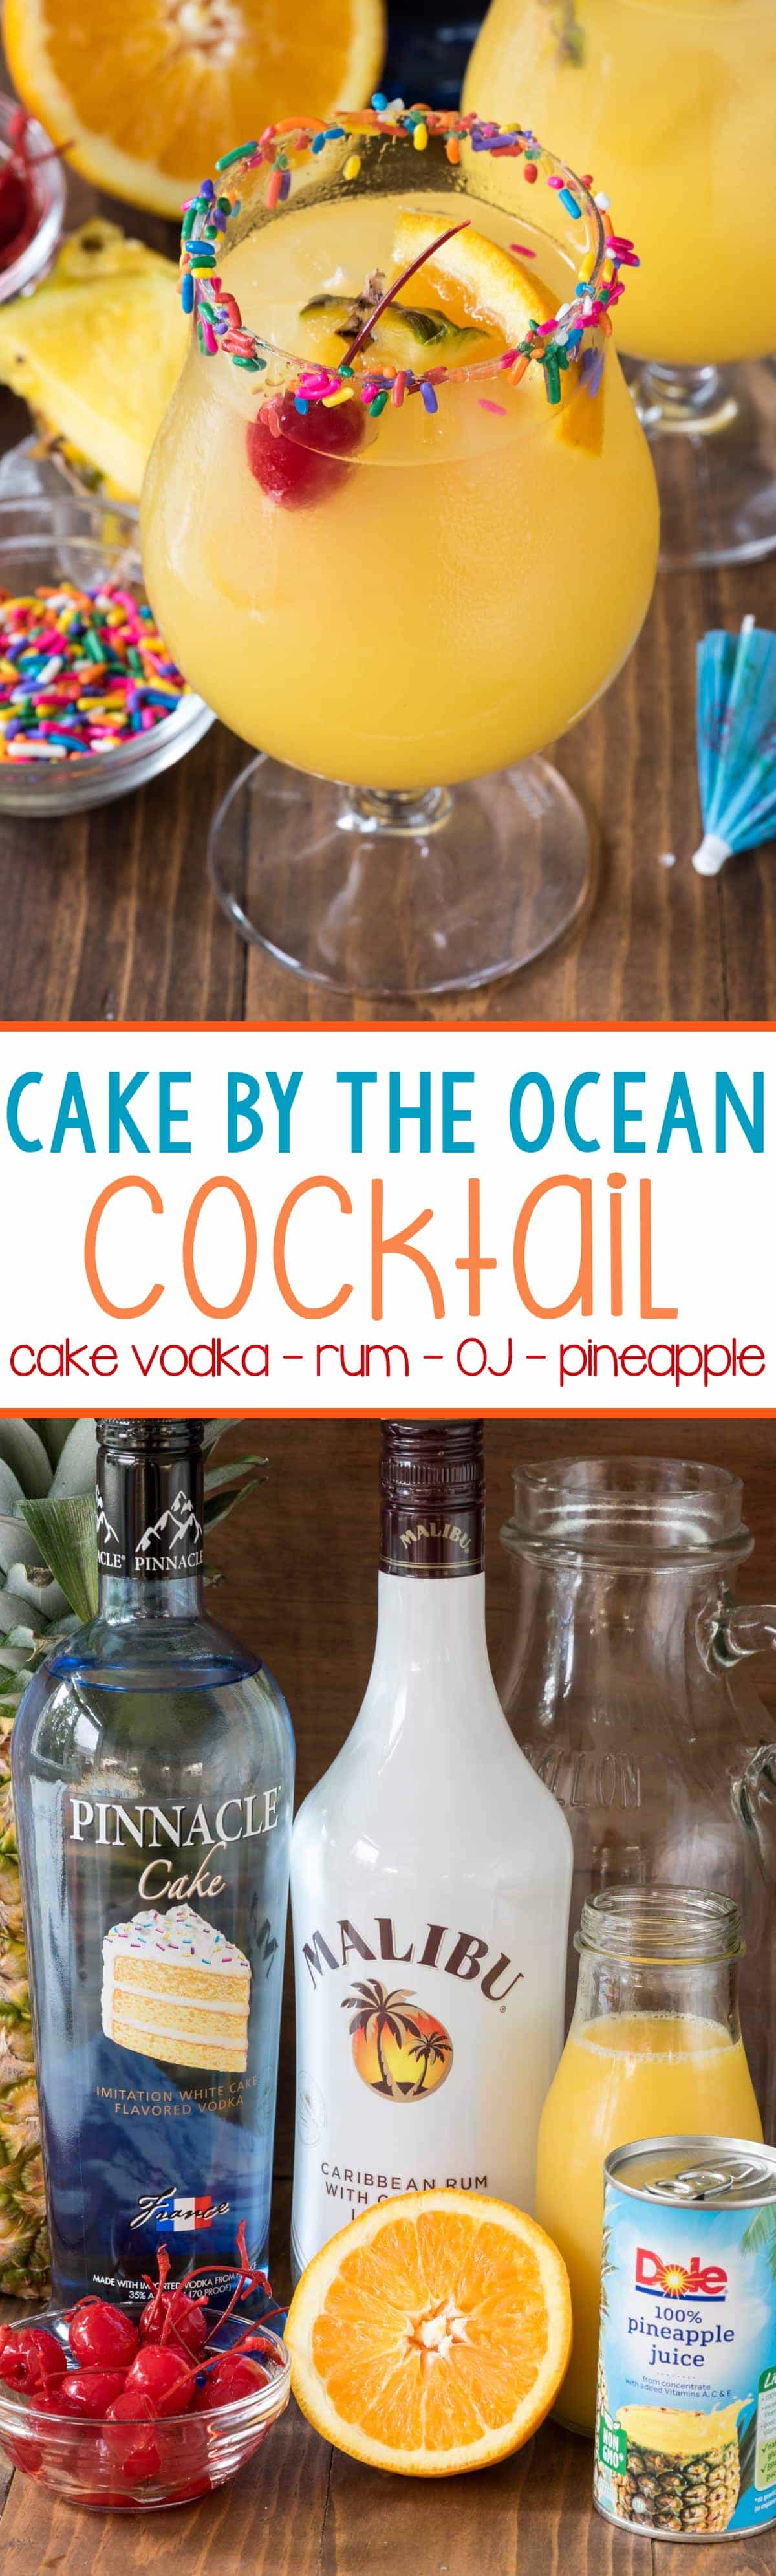 Cake By The Ocean Tail Crazy For